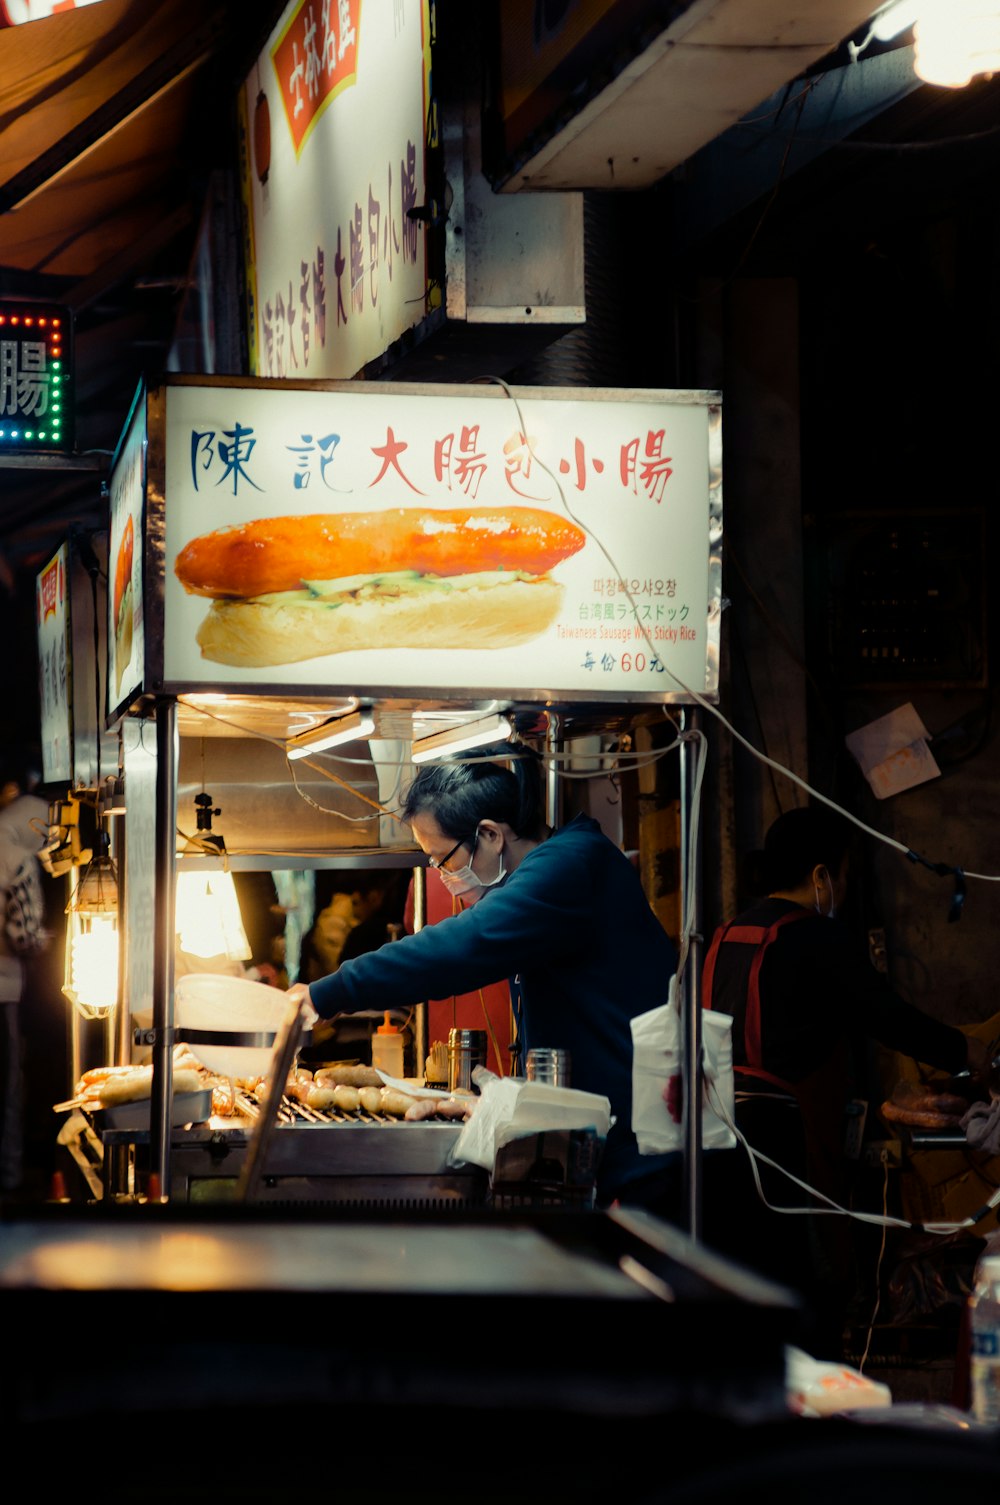 a man standing in front of a hot dog stand